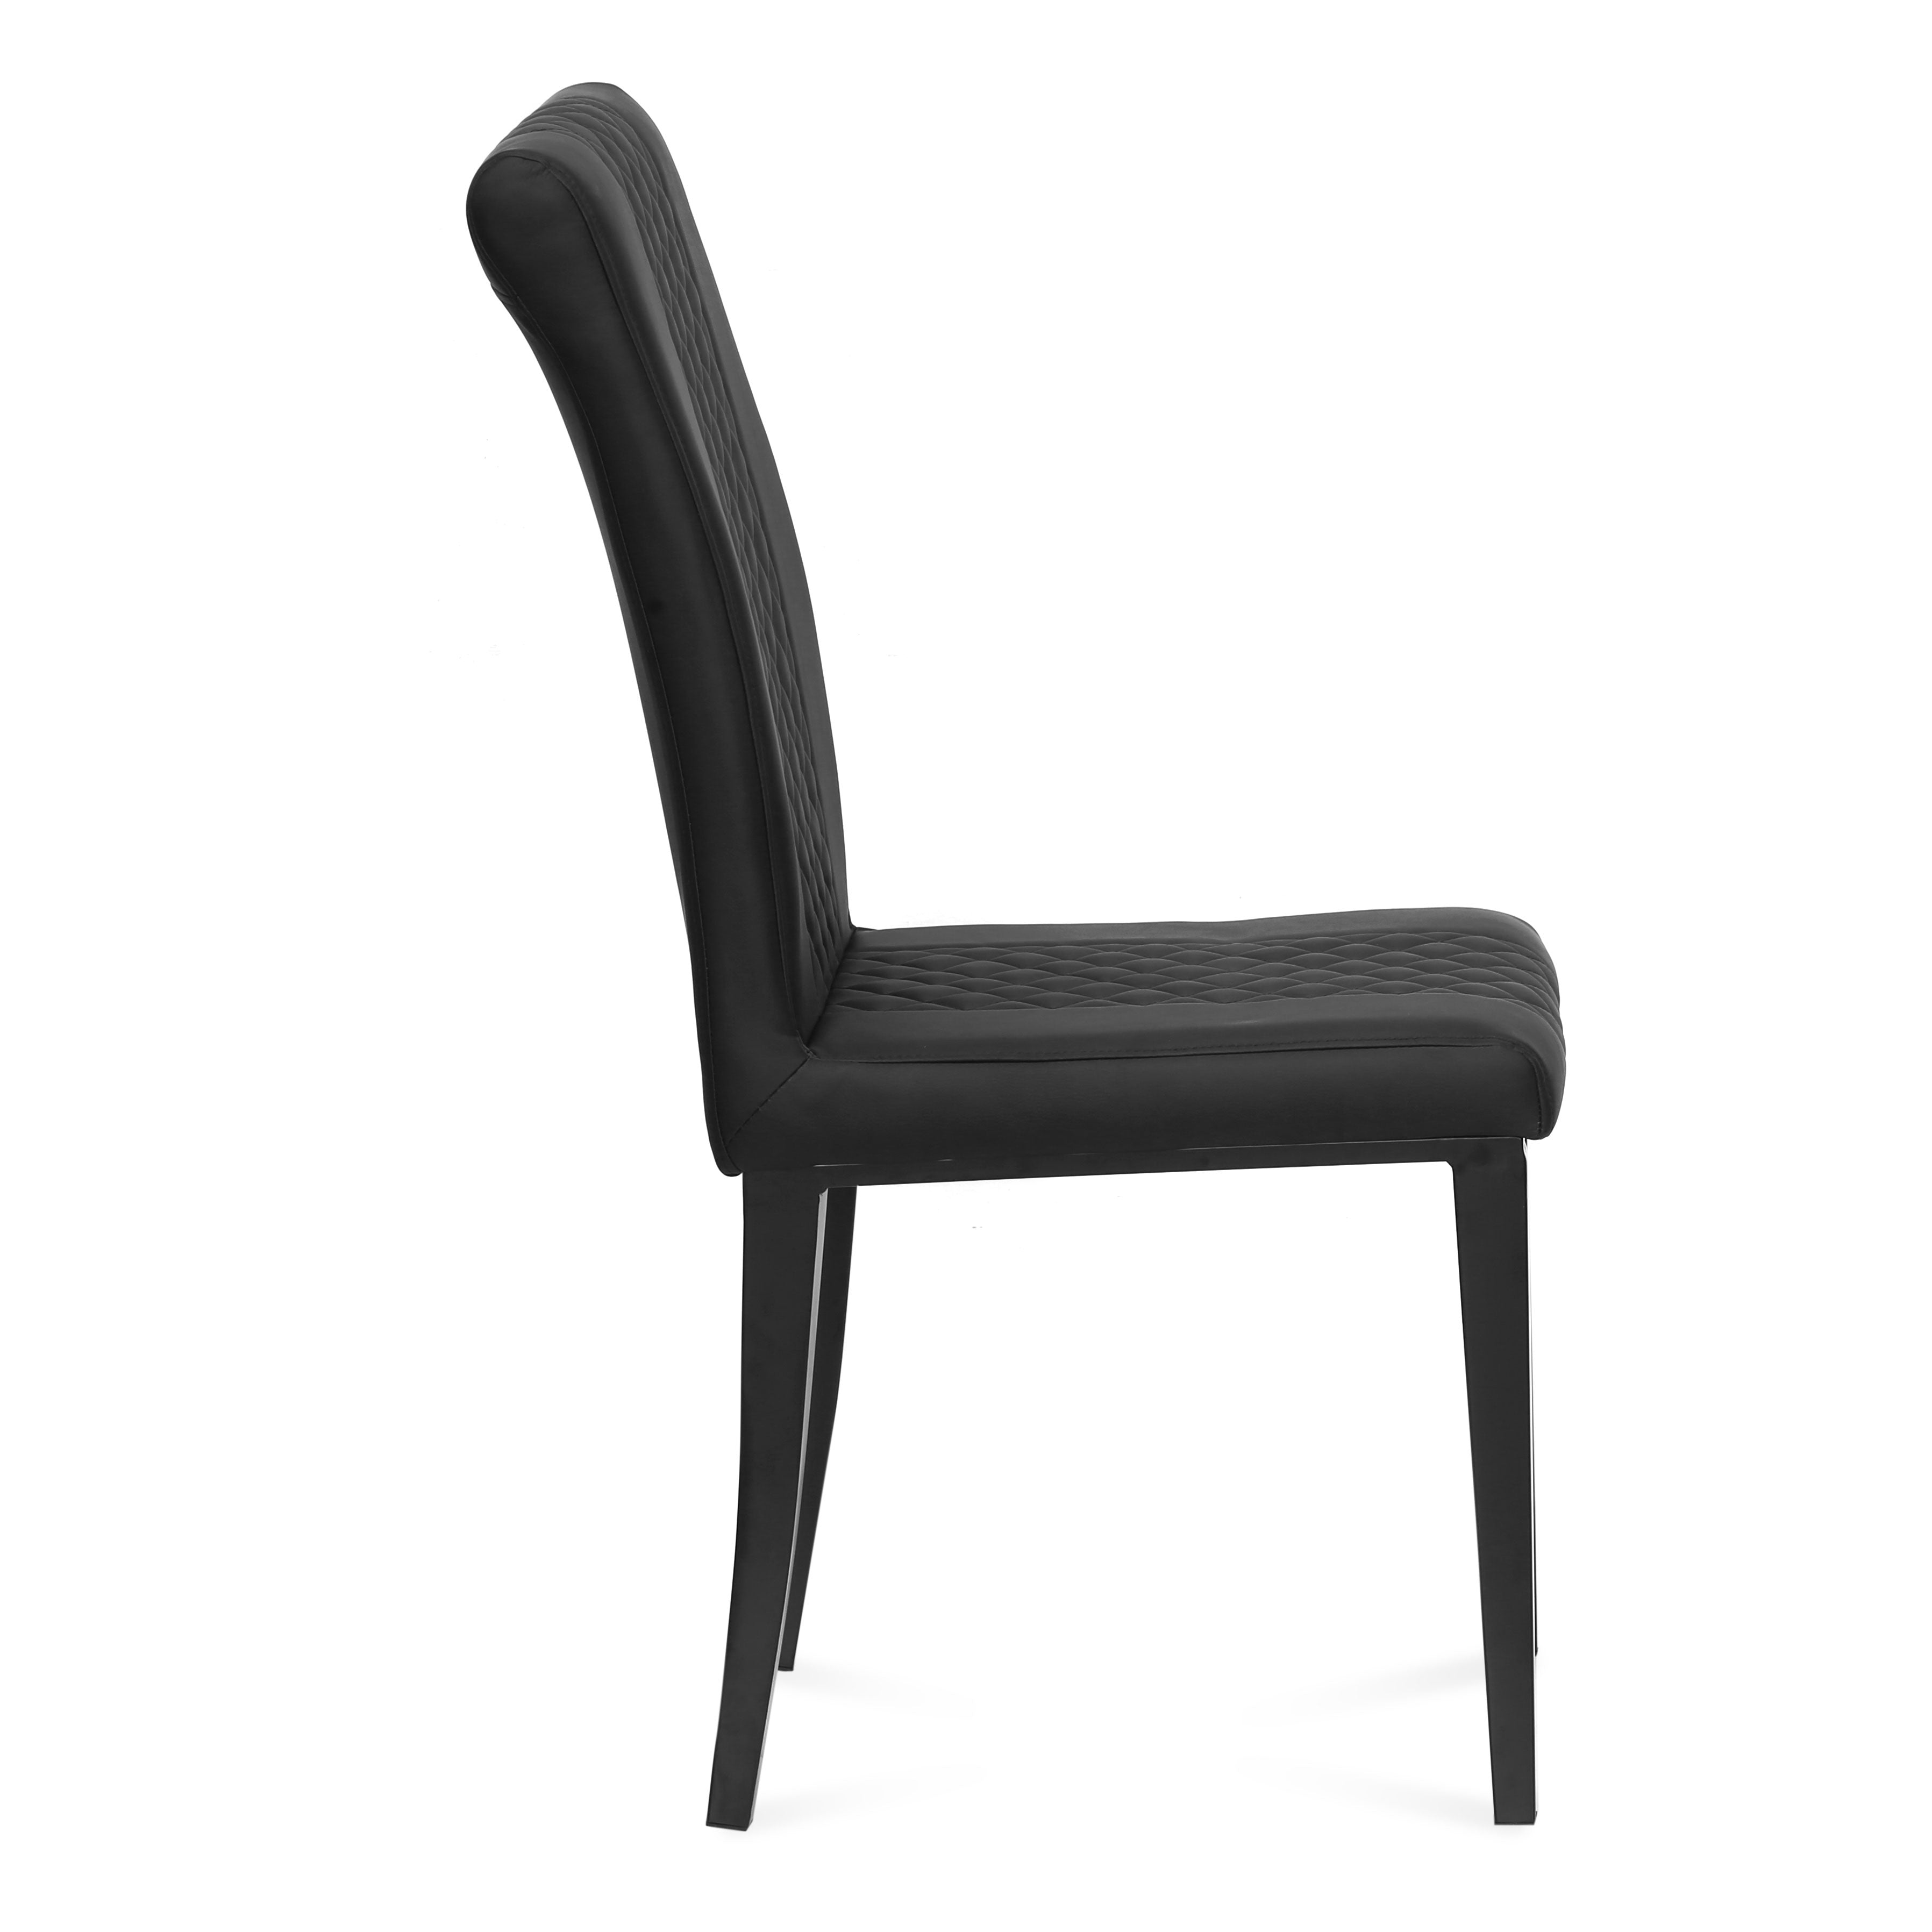 Mickle Dining Chair (Black)